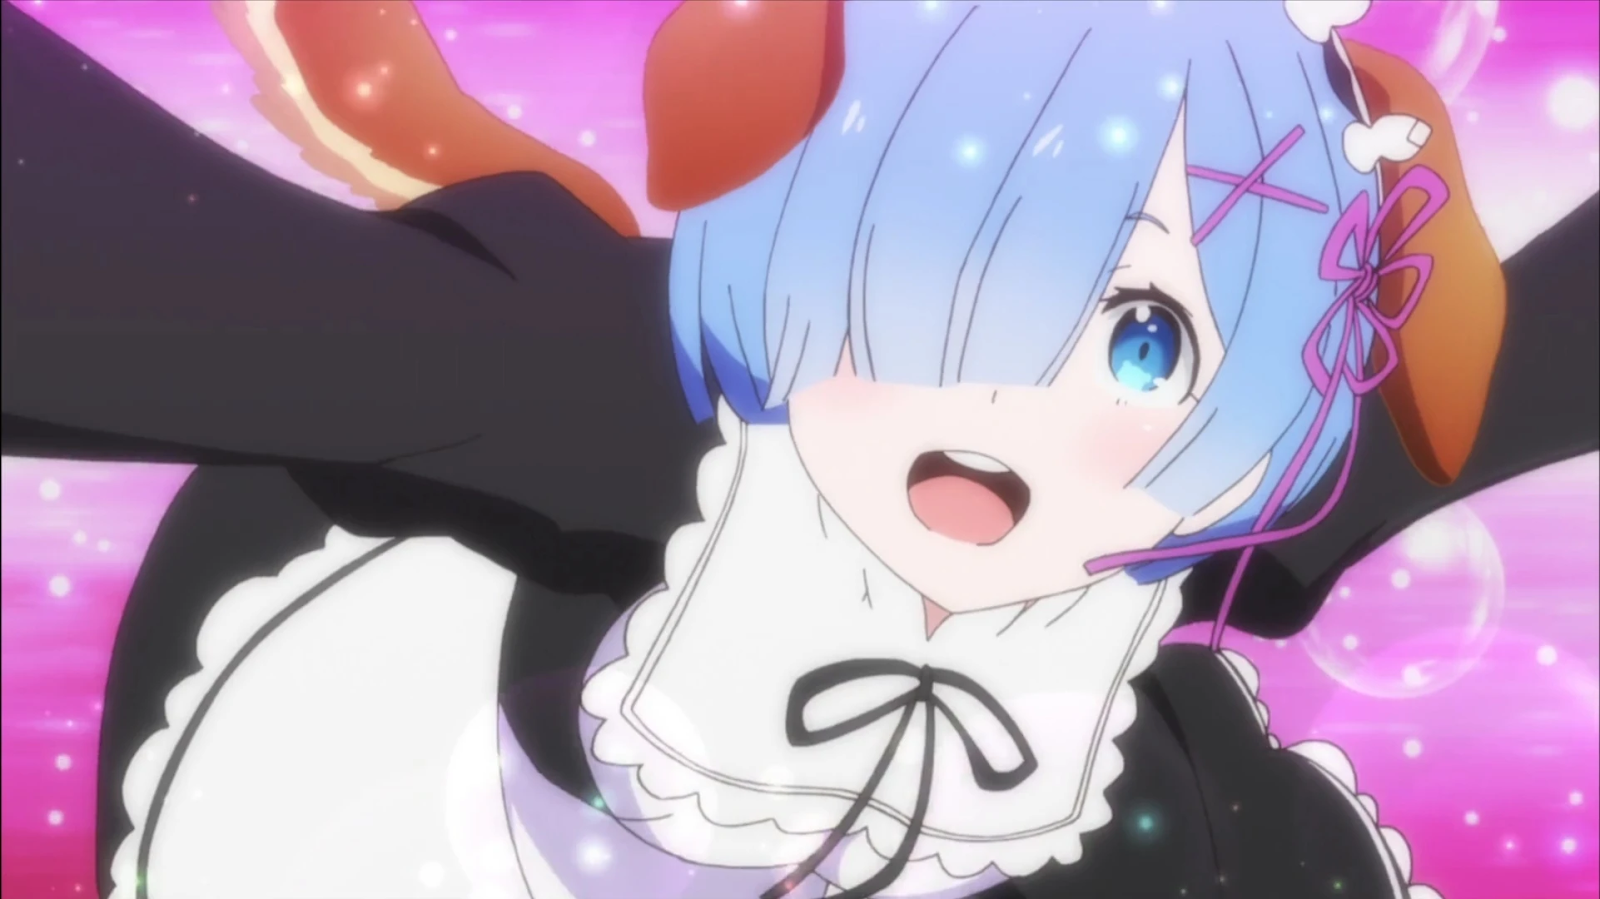 Qoo News] Re:Zero is making an OVA for theater release